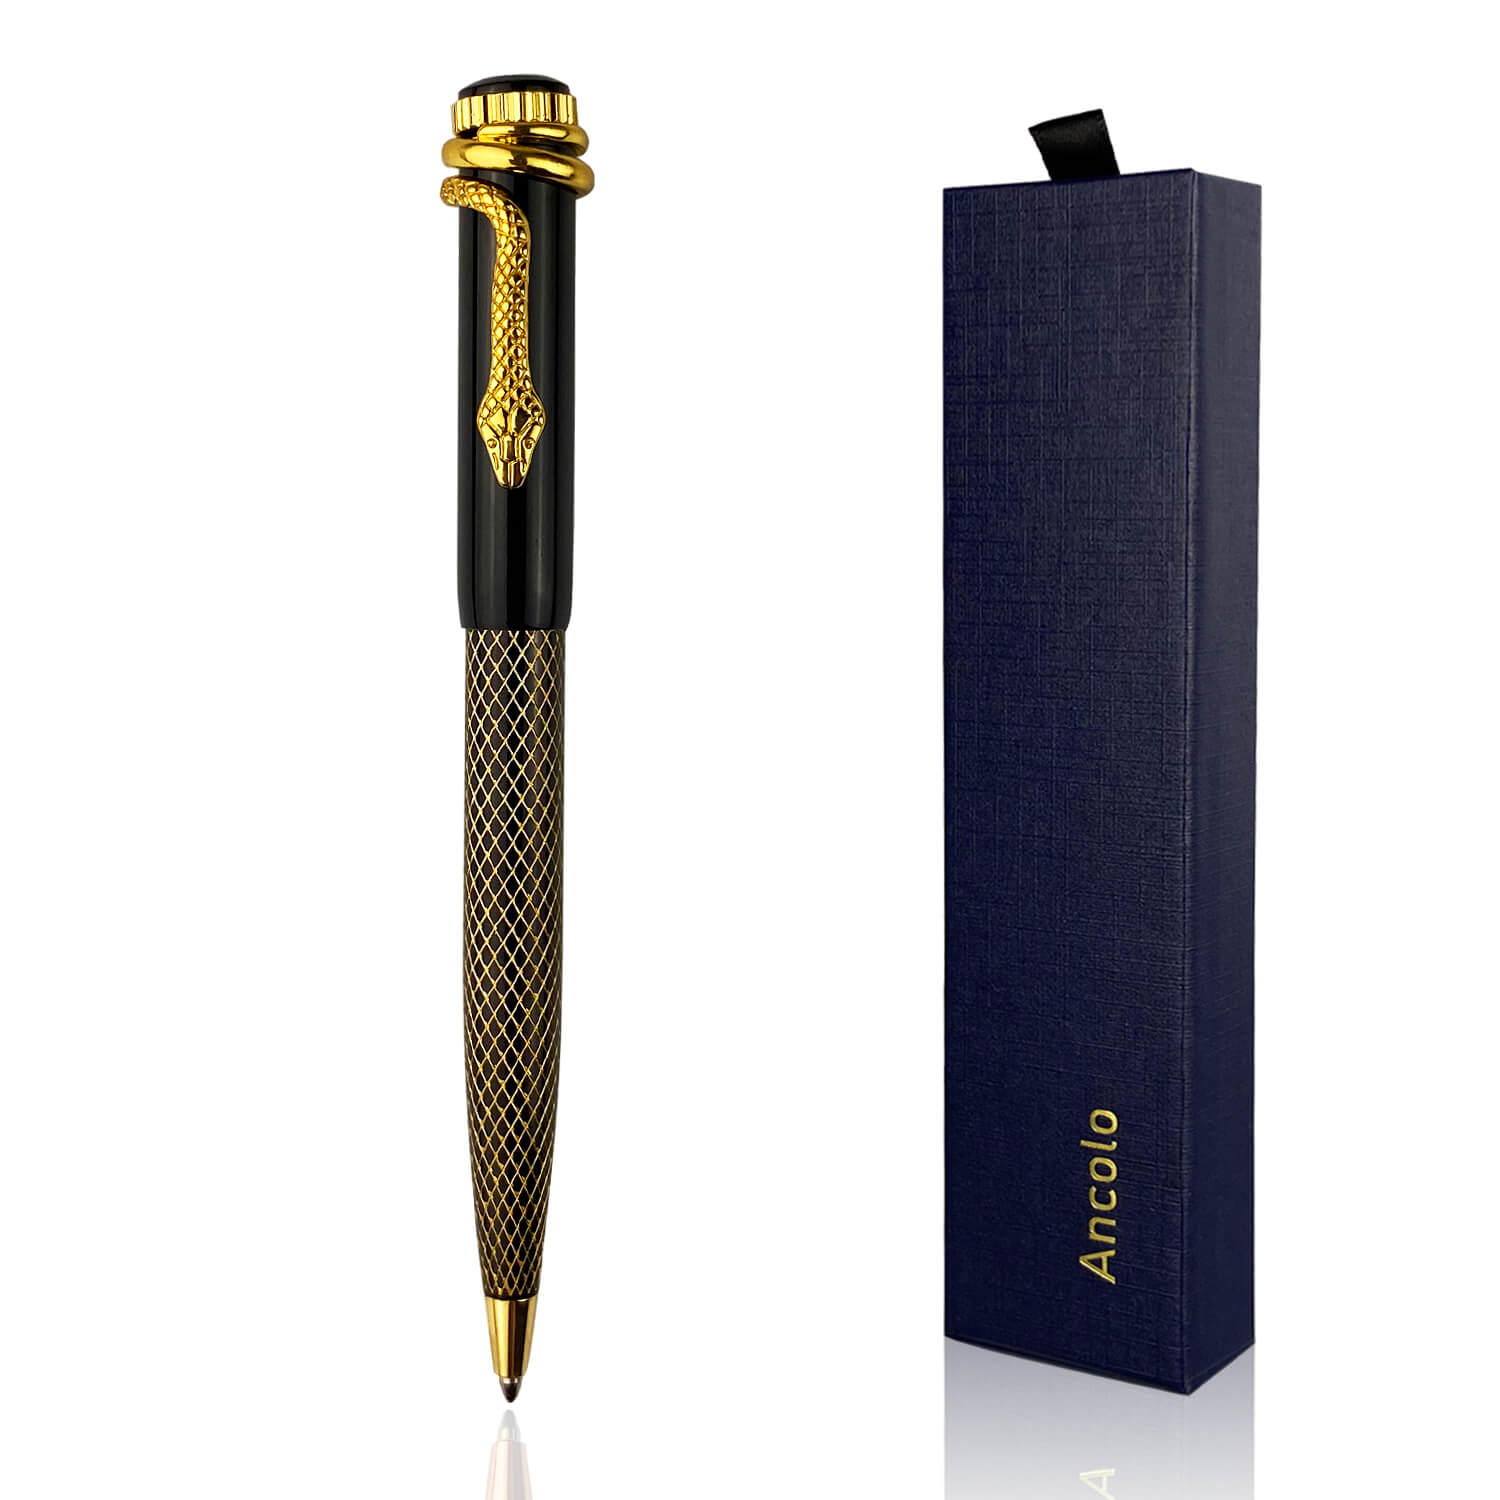 crewtone 20341 Luxury Ball Point Pen Metal Swarovski Pen (Mesmerizing Pen  With Floating Swarovski Glitter) Gift Set for Men & Women, Student, And  Executives With High End Gift Box. : Amazon.in: Office